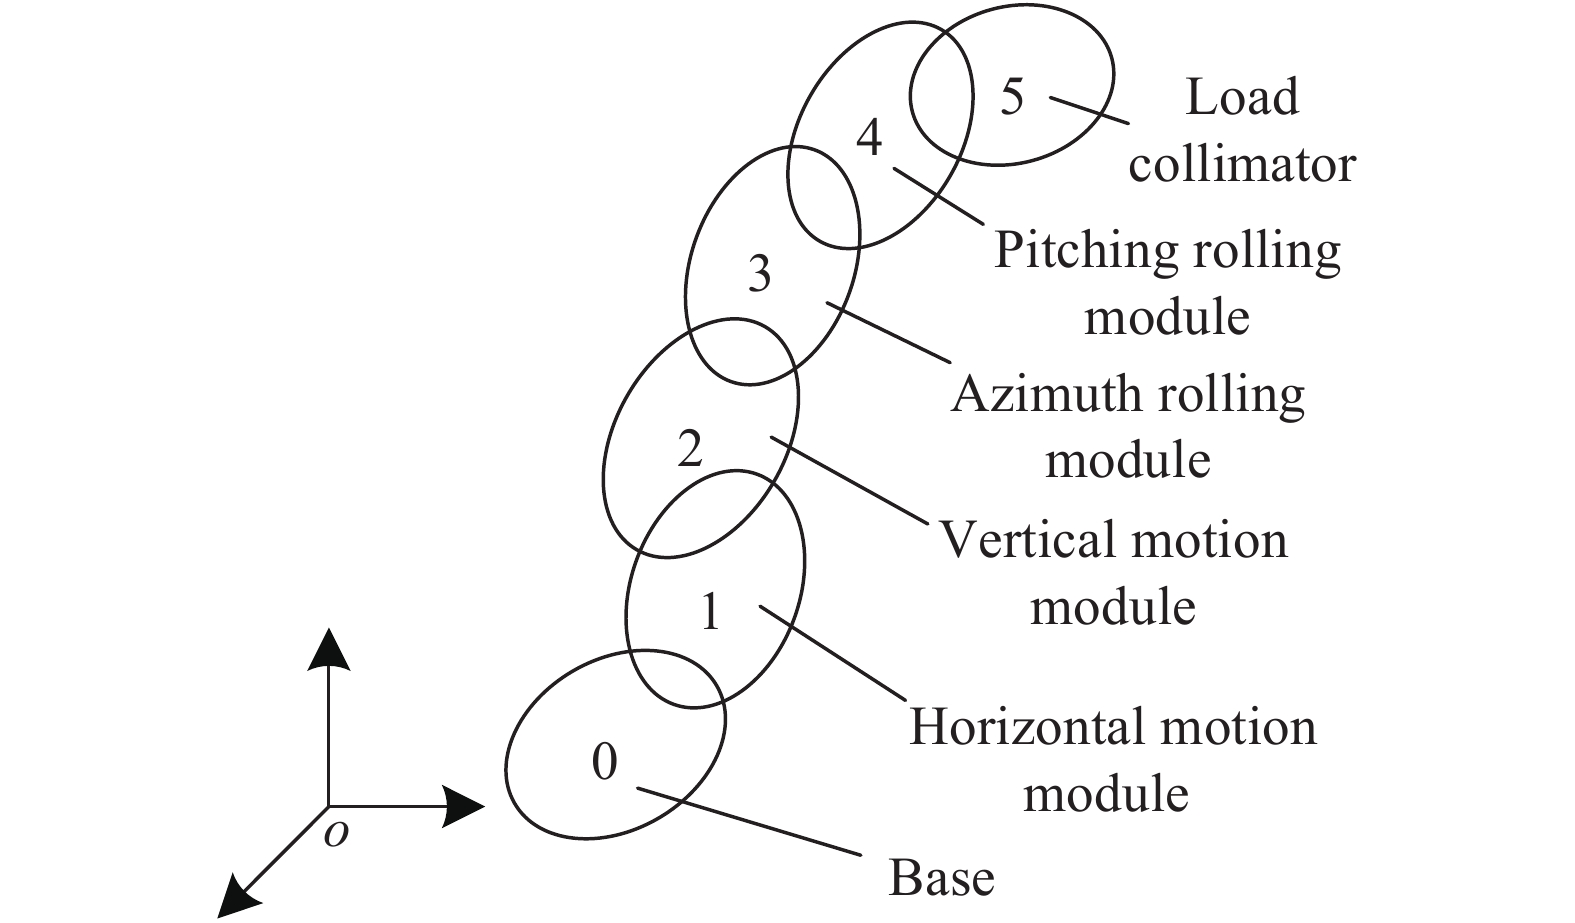 Topology structure of remotion platform